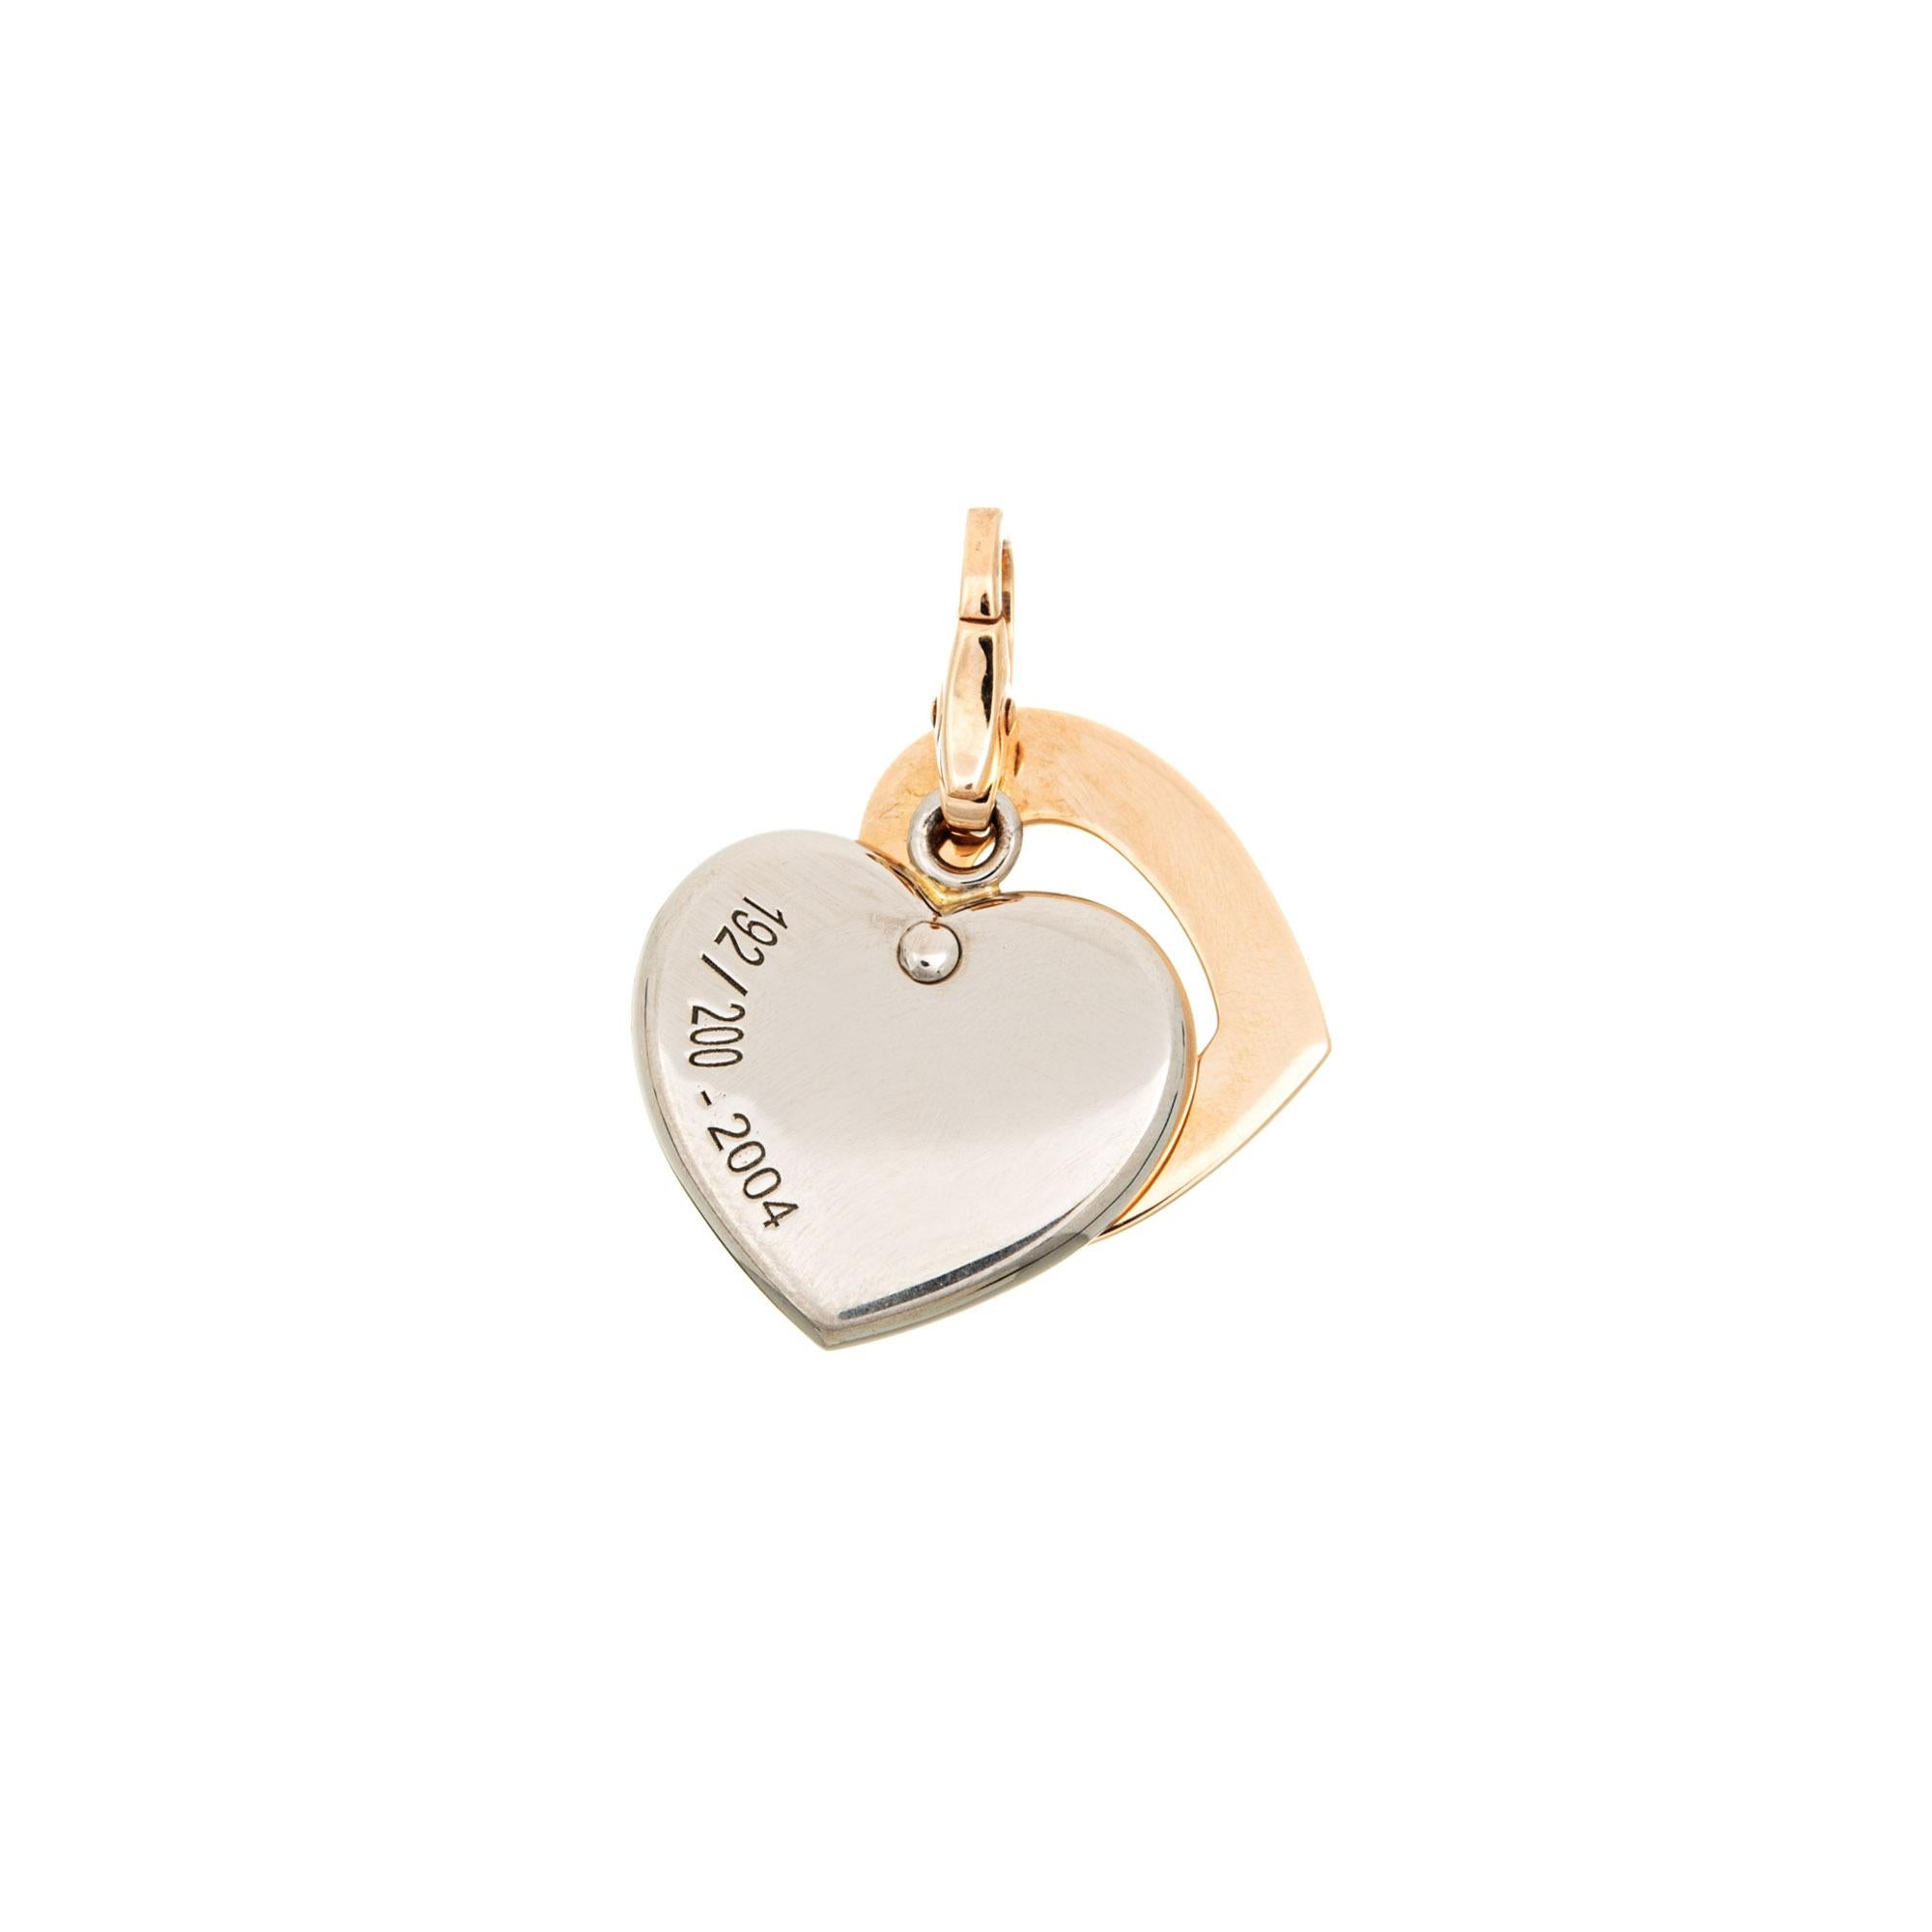 Limited edition pre-owned Cartier double heart charm (or pendant), crafted in 18 karat yellow & white gold.  

One estimated 0.03 carat round brilliant cut diamond is set into the heart (estimated at F-G color and VVS2 clarity). 
The charm is a